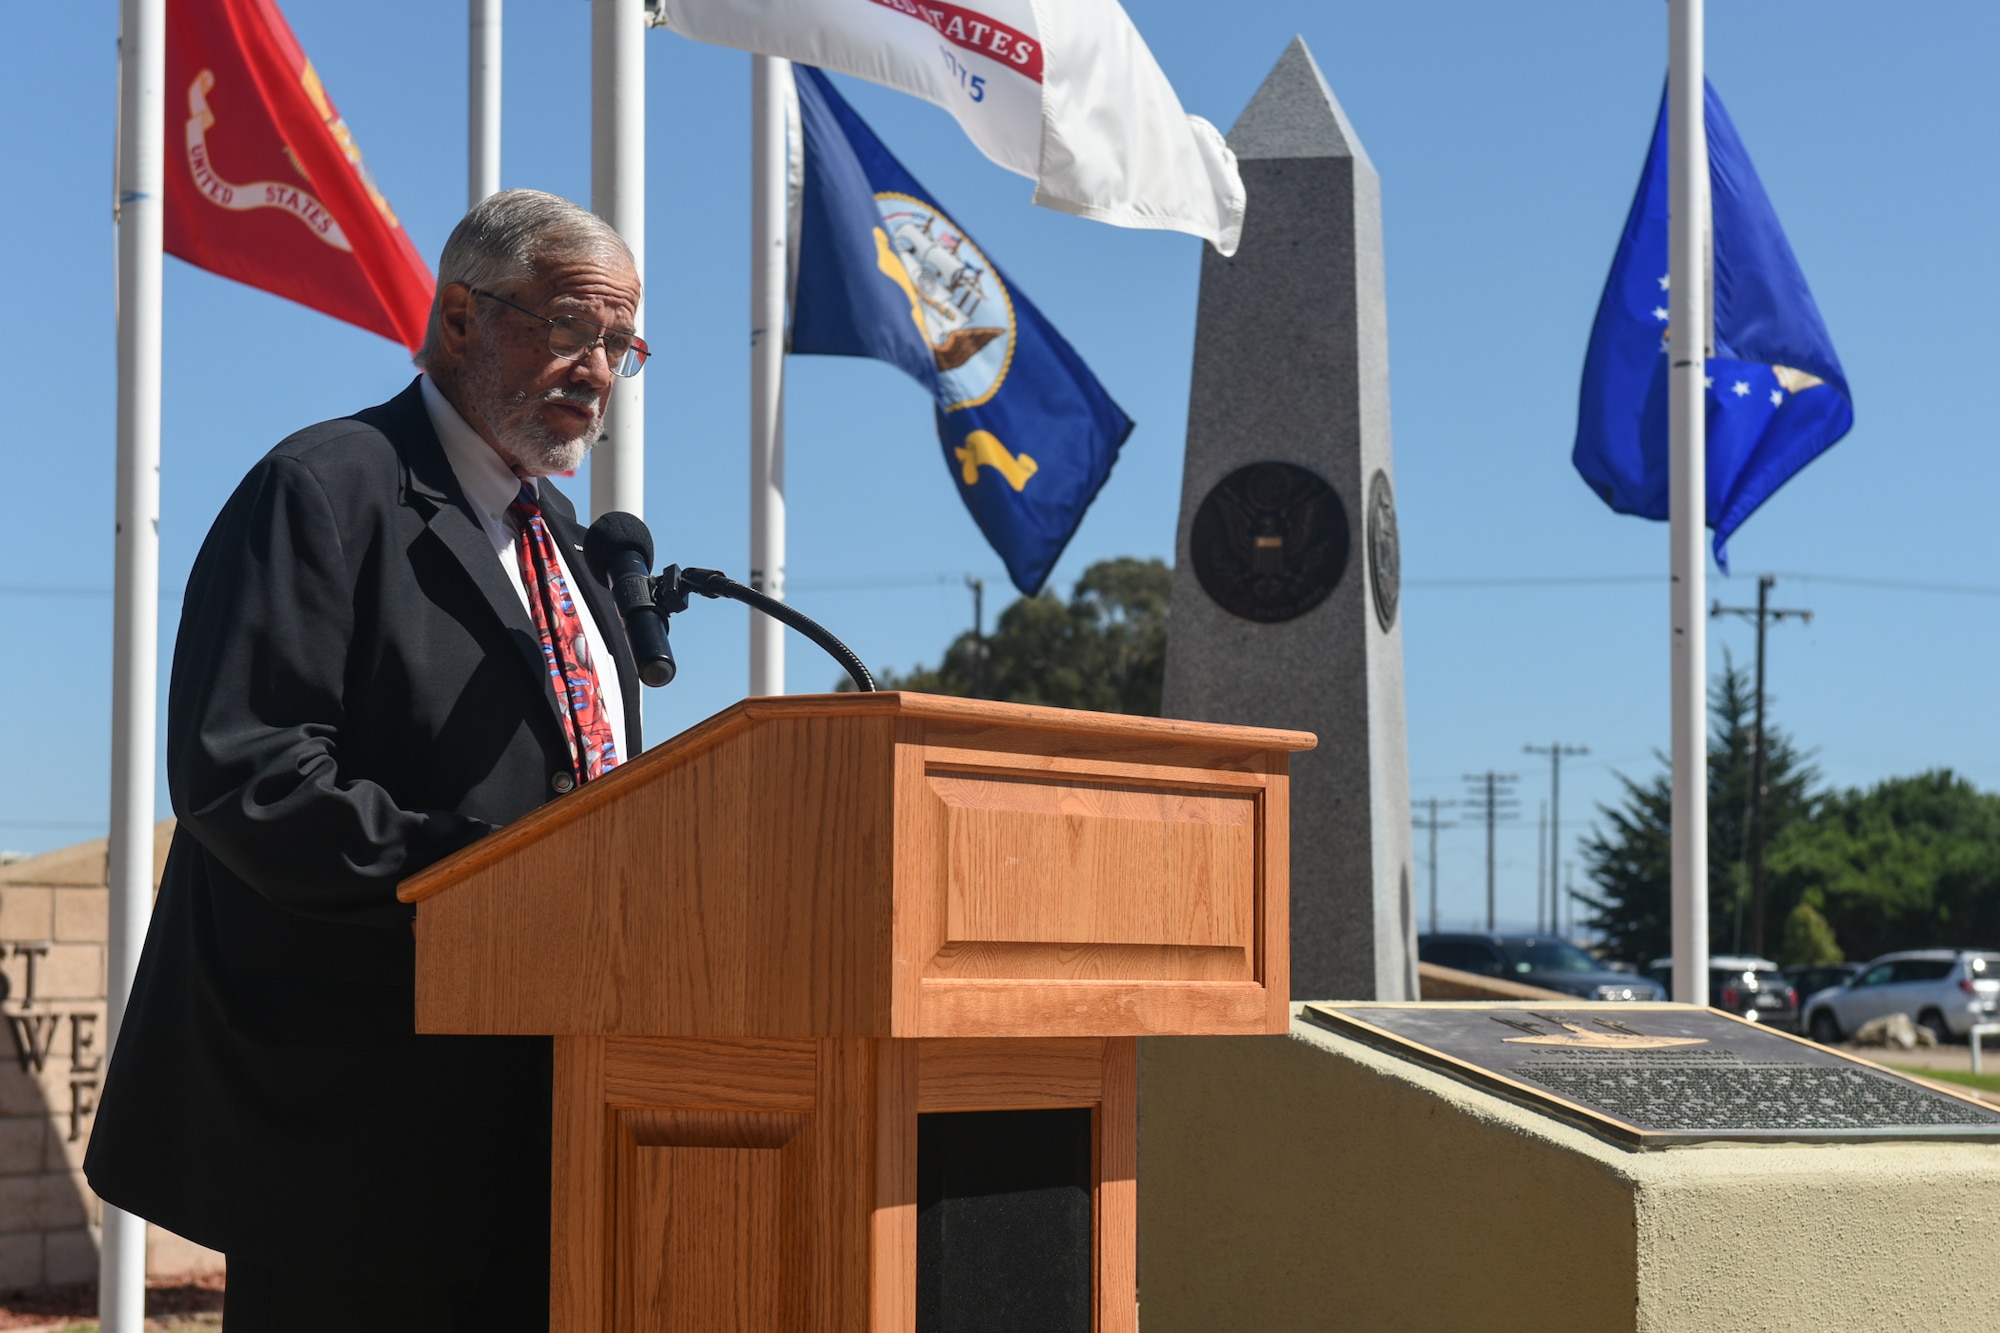 Photo from the POW/MIA Remembrance Week Closing Ceremony at Vandenberg Air Force Base.